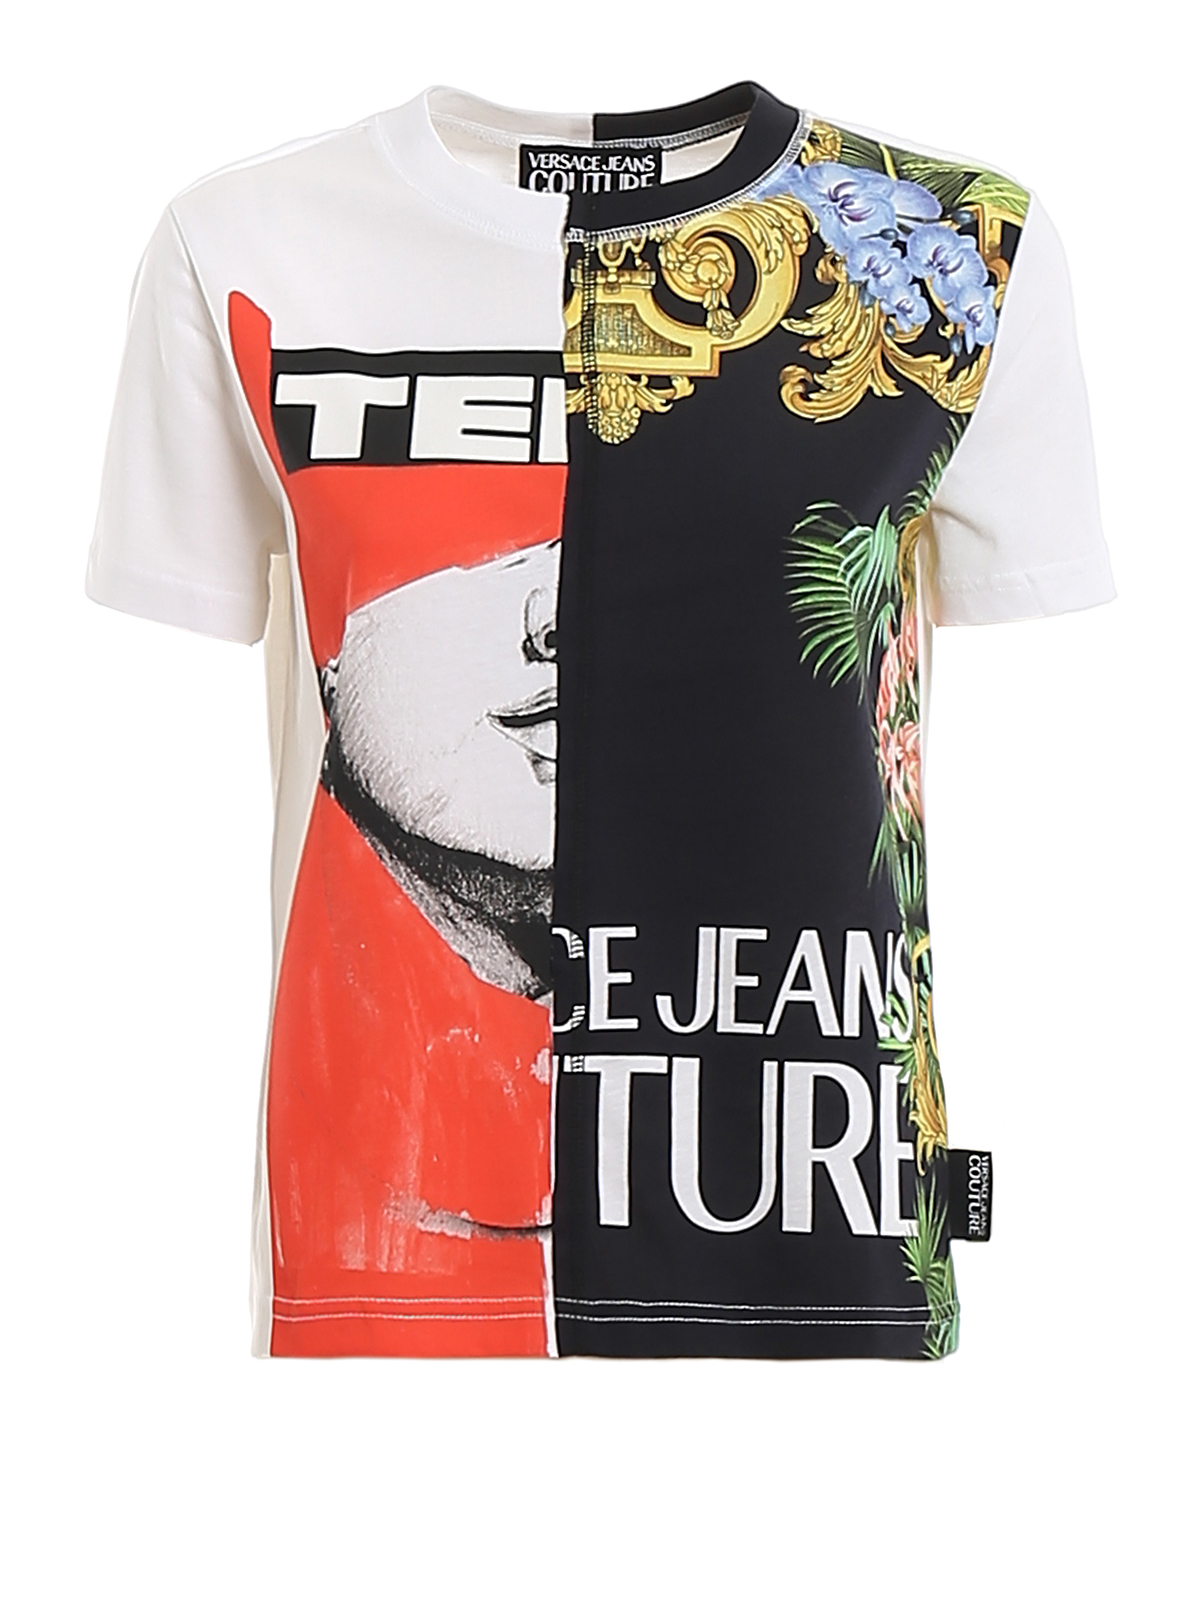 VERSACE JEANS FRONT MAXI LOGO PRINTED T-SHIRT